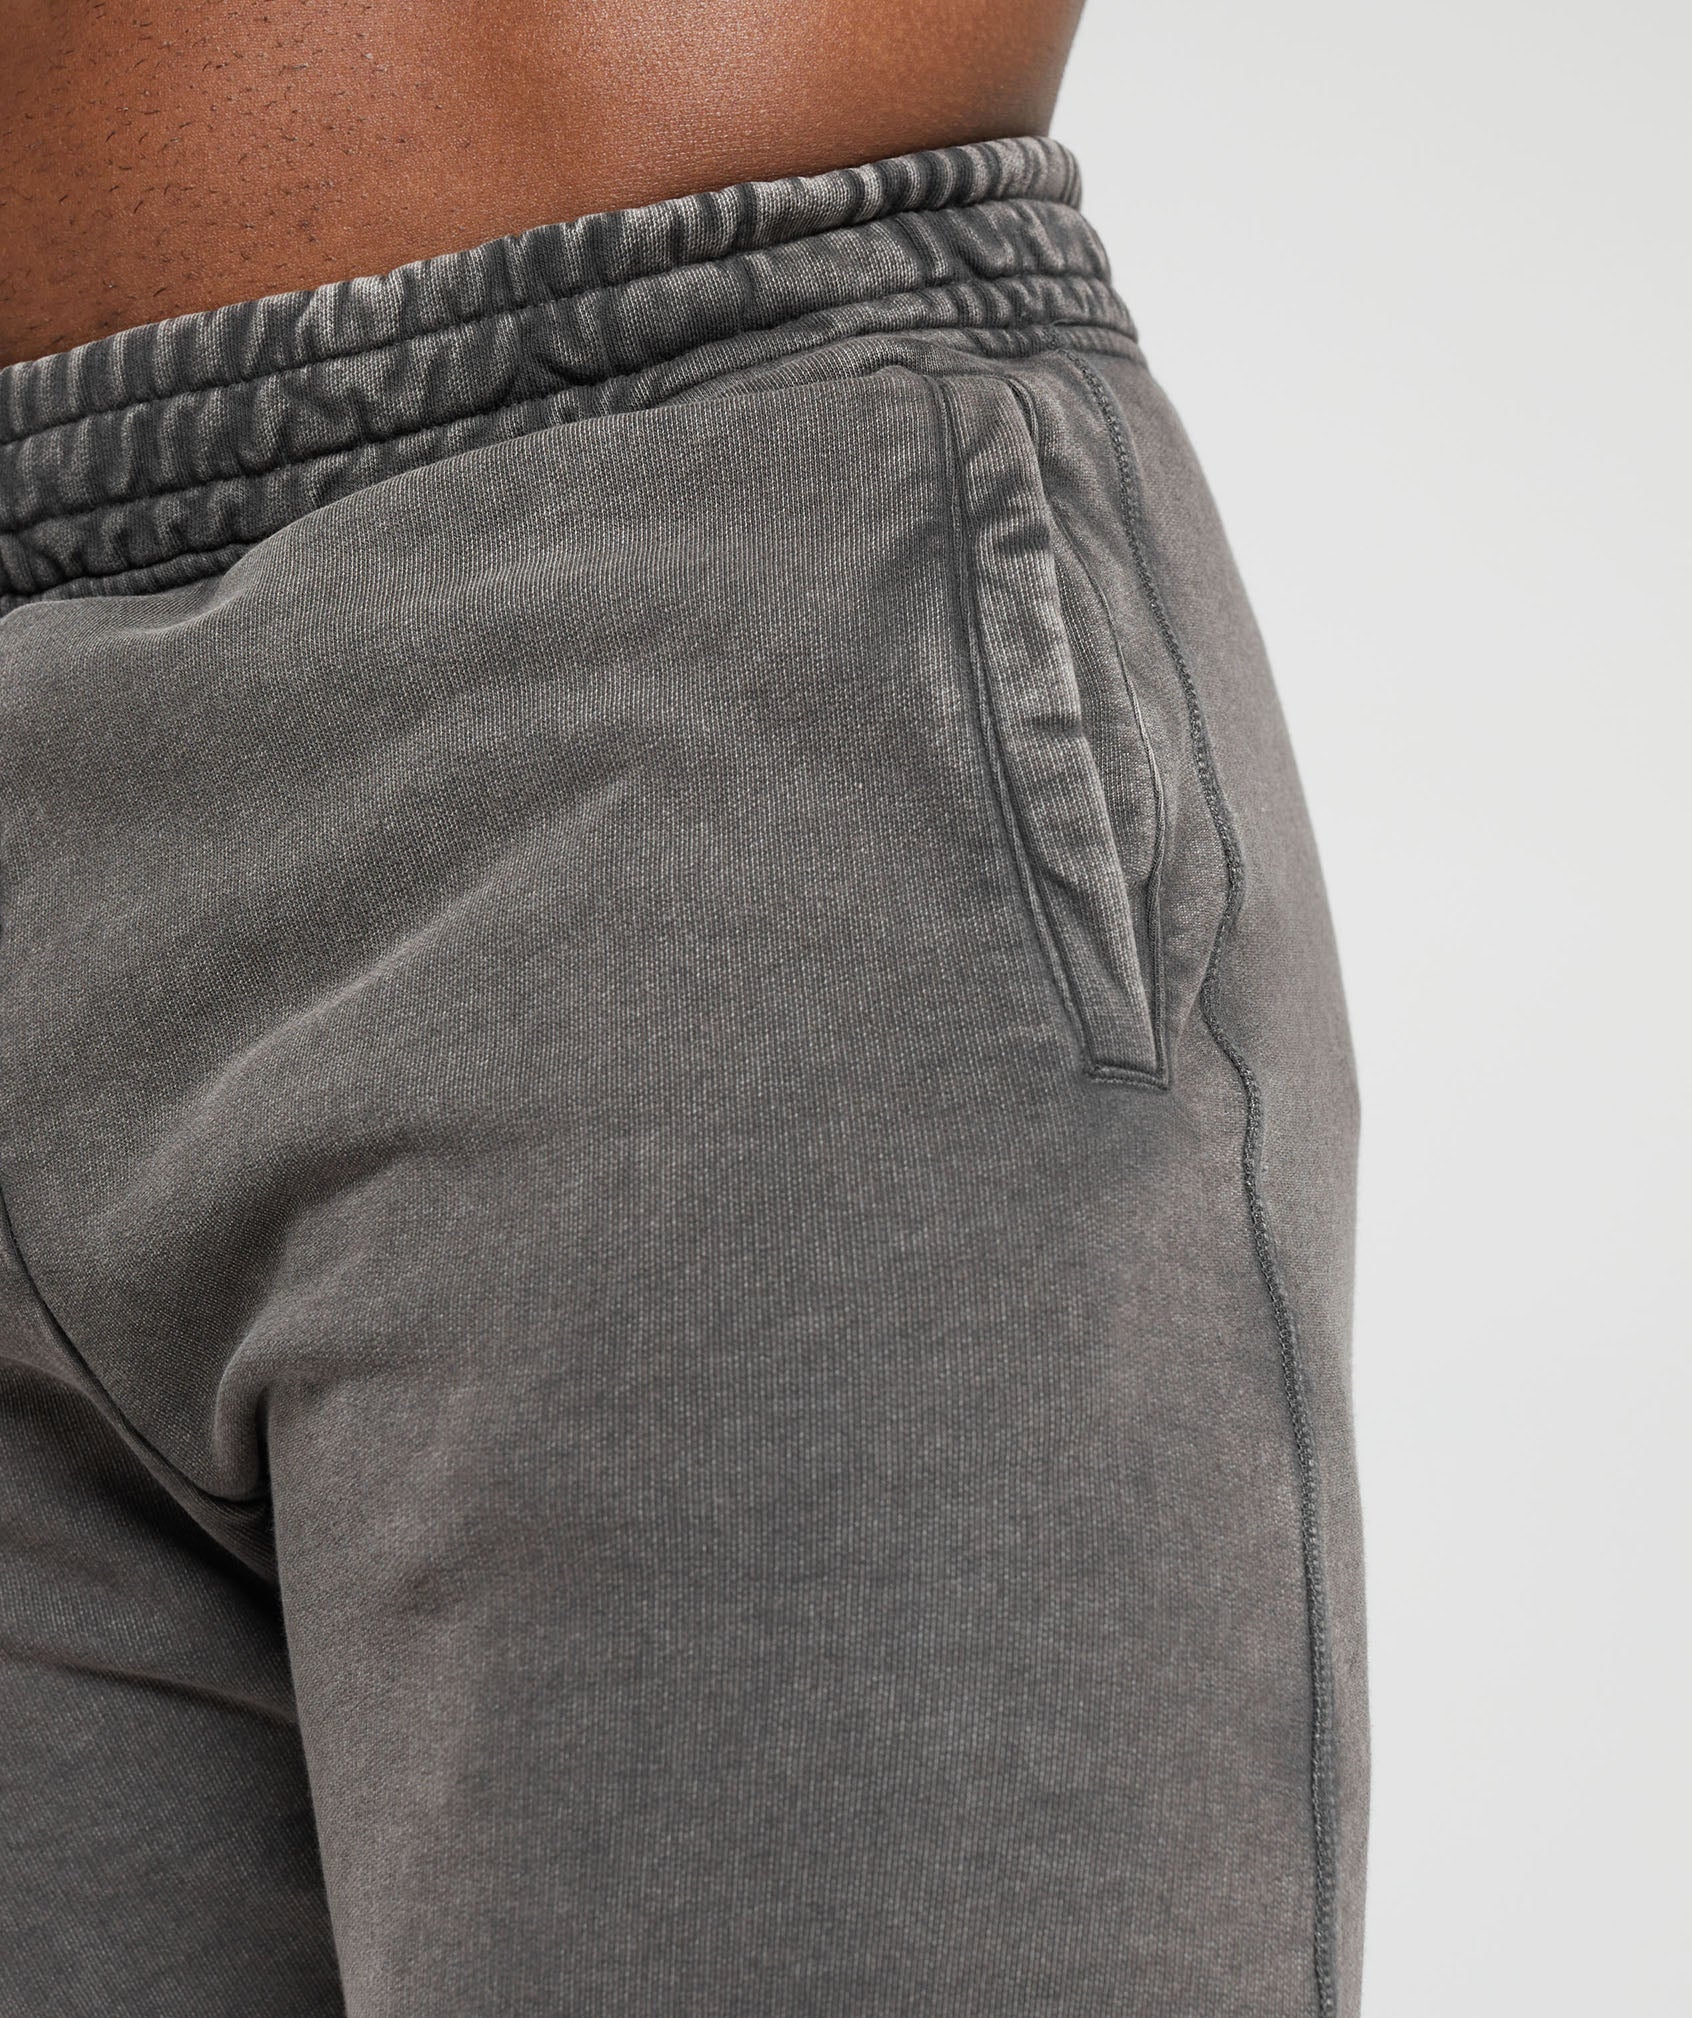 Heritage Joggers in Onyx Grey - view 5